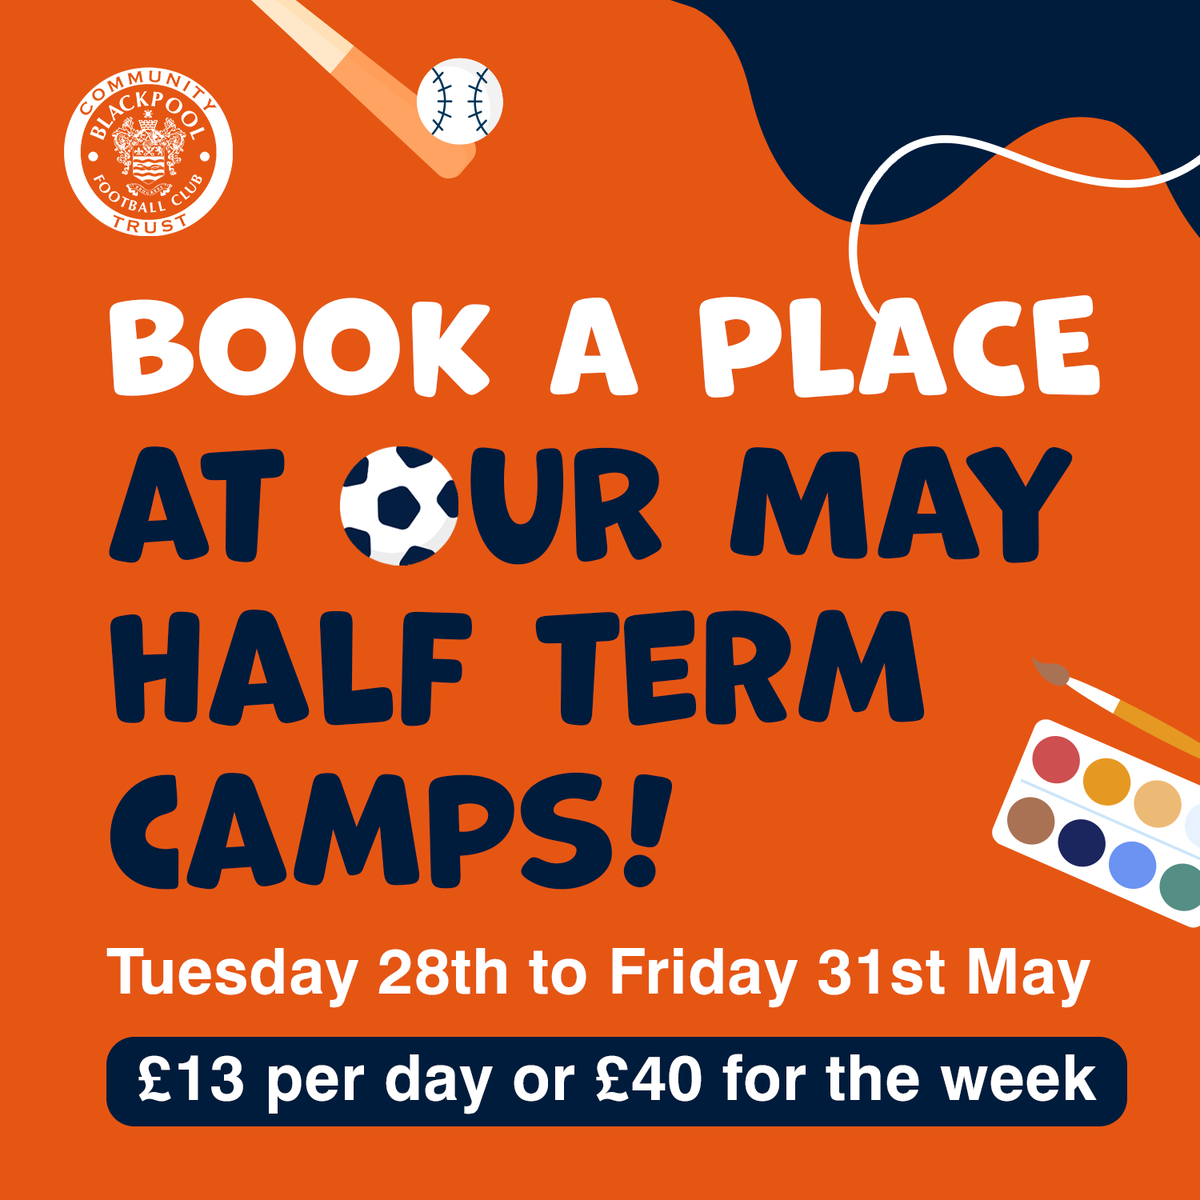 Our May camps start tomorrow! 🏓 Sports Camp @ArmfieldFCAT 9am–5pm 🎾 Sports Camp @UnityBlackpool: 8am-5pm 🎳 Sports Camp Ansdell Primary School: 8am-5pm 🕺 Dance Camp @AVRDance: 8am–5pm ⚽️ Football & Girls Football Camp @ Aspire Sports Hub: 8am-5pm bfcct.co.uk/holiday-camps/